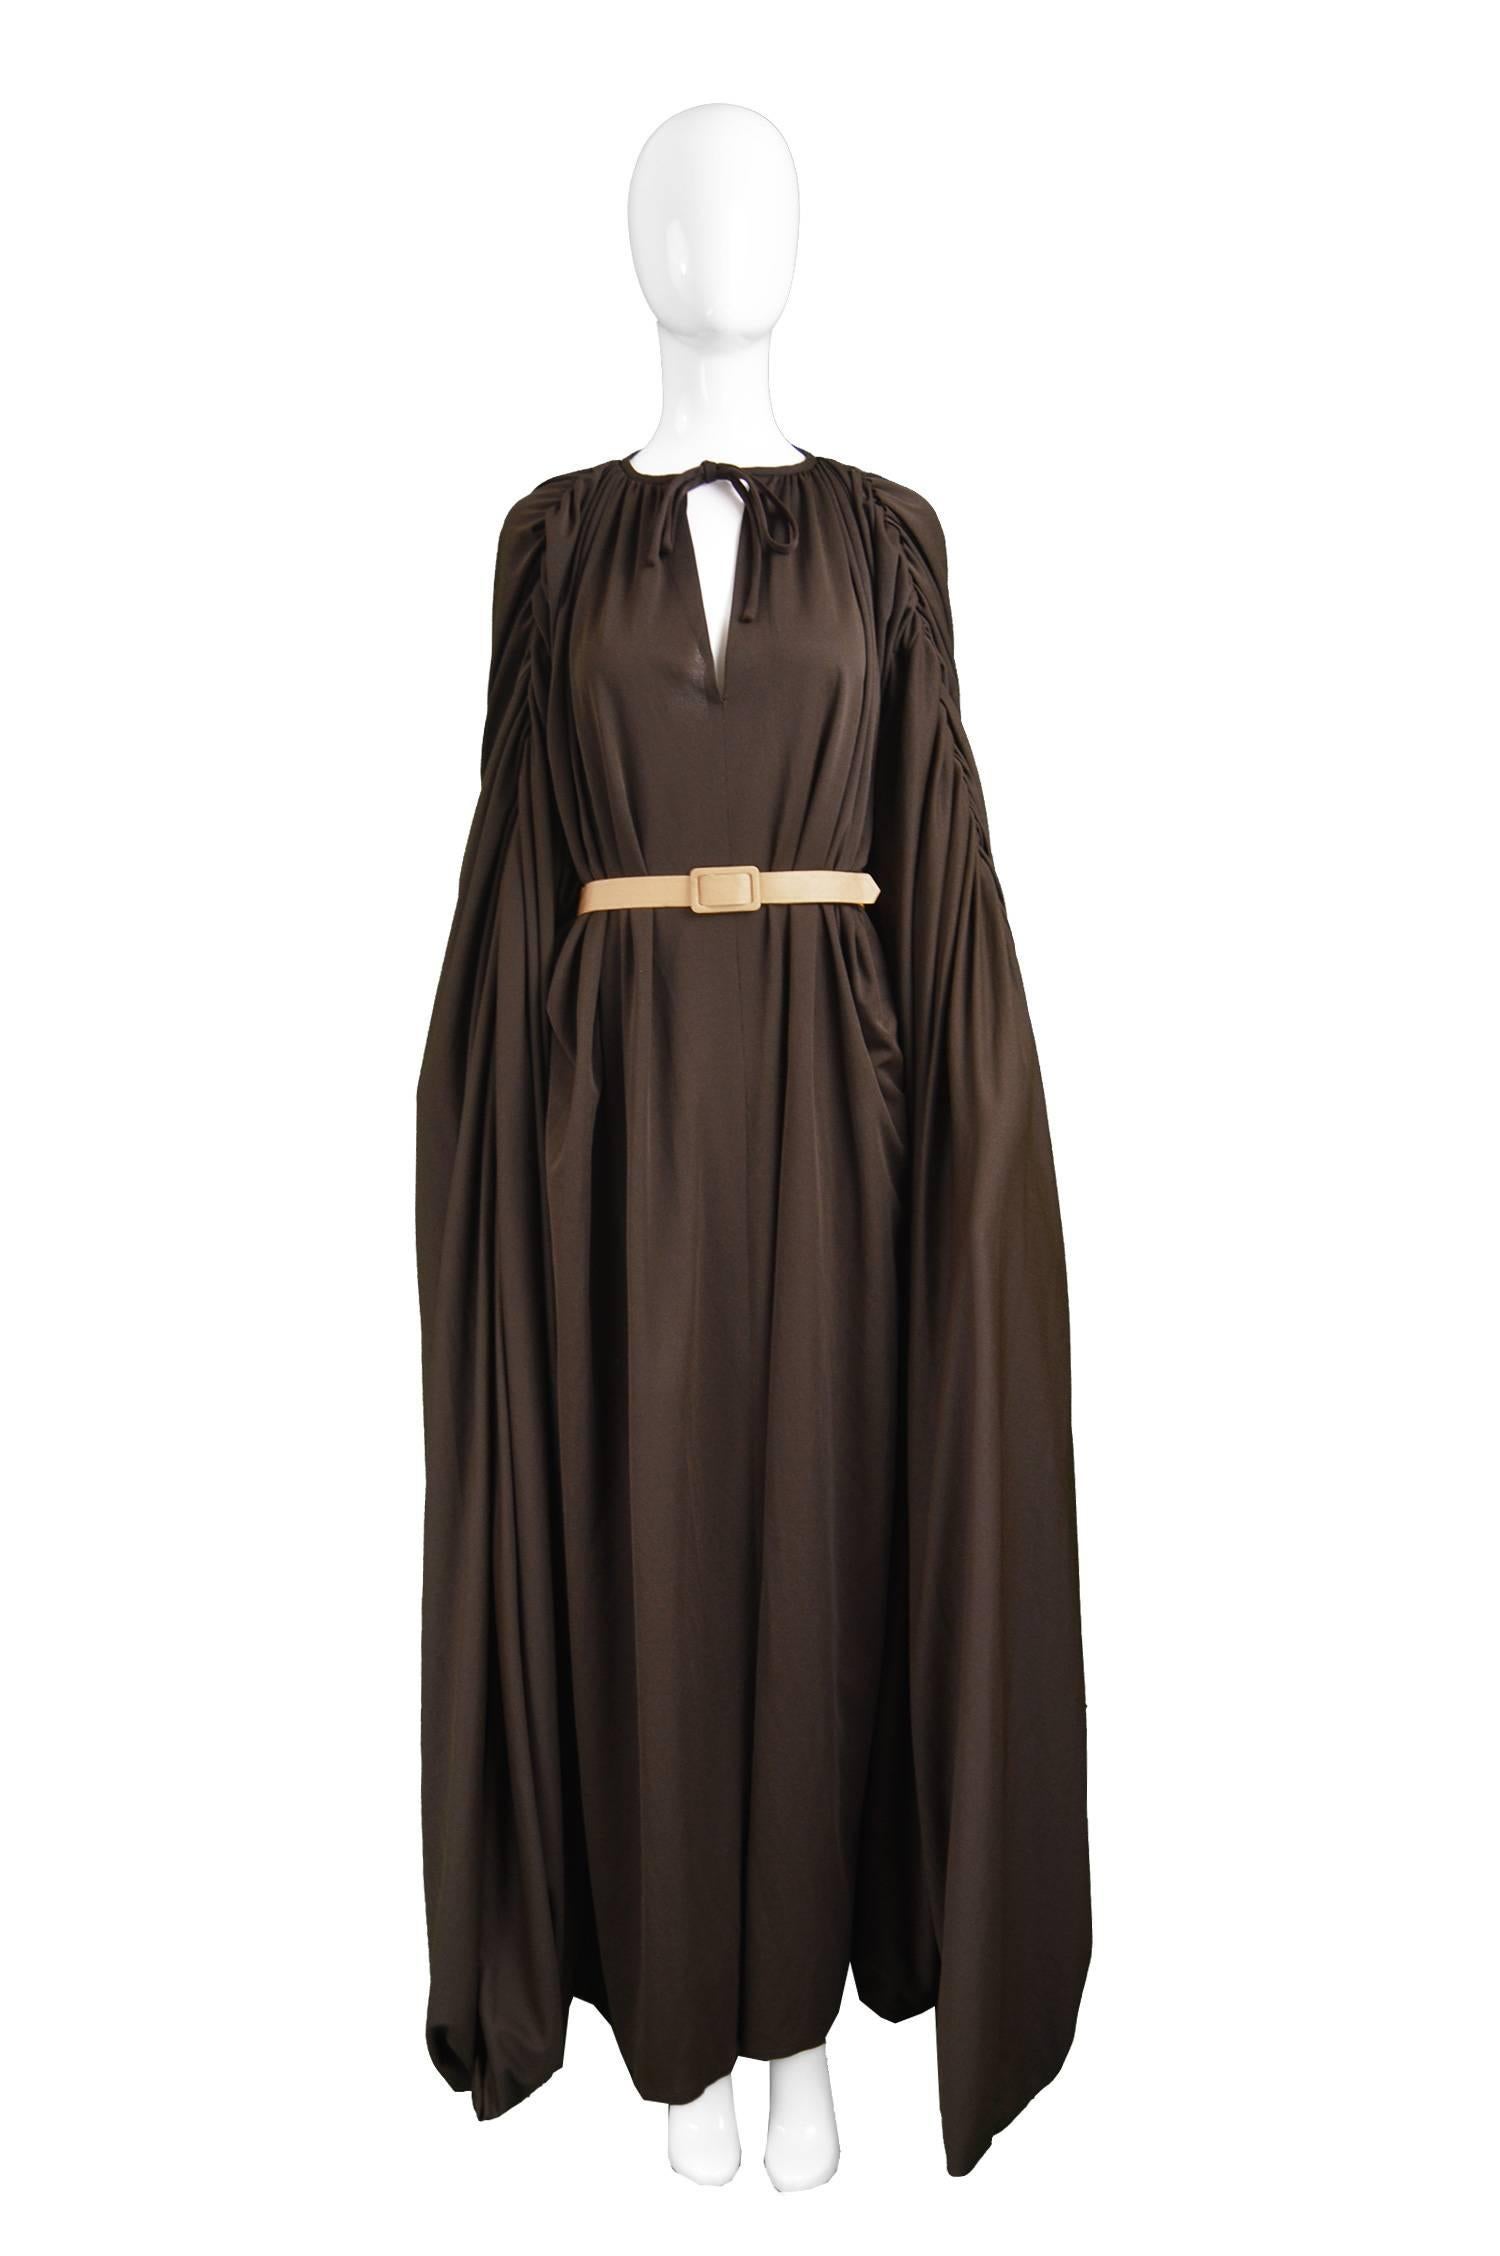 Vintage 1970s Kimono Style Brown Maxi Dress with Huge Dramatic Sleeves 1